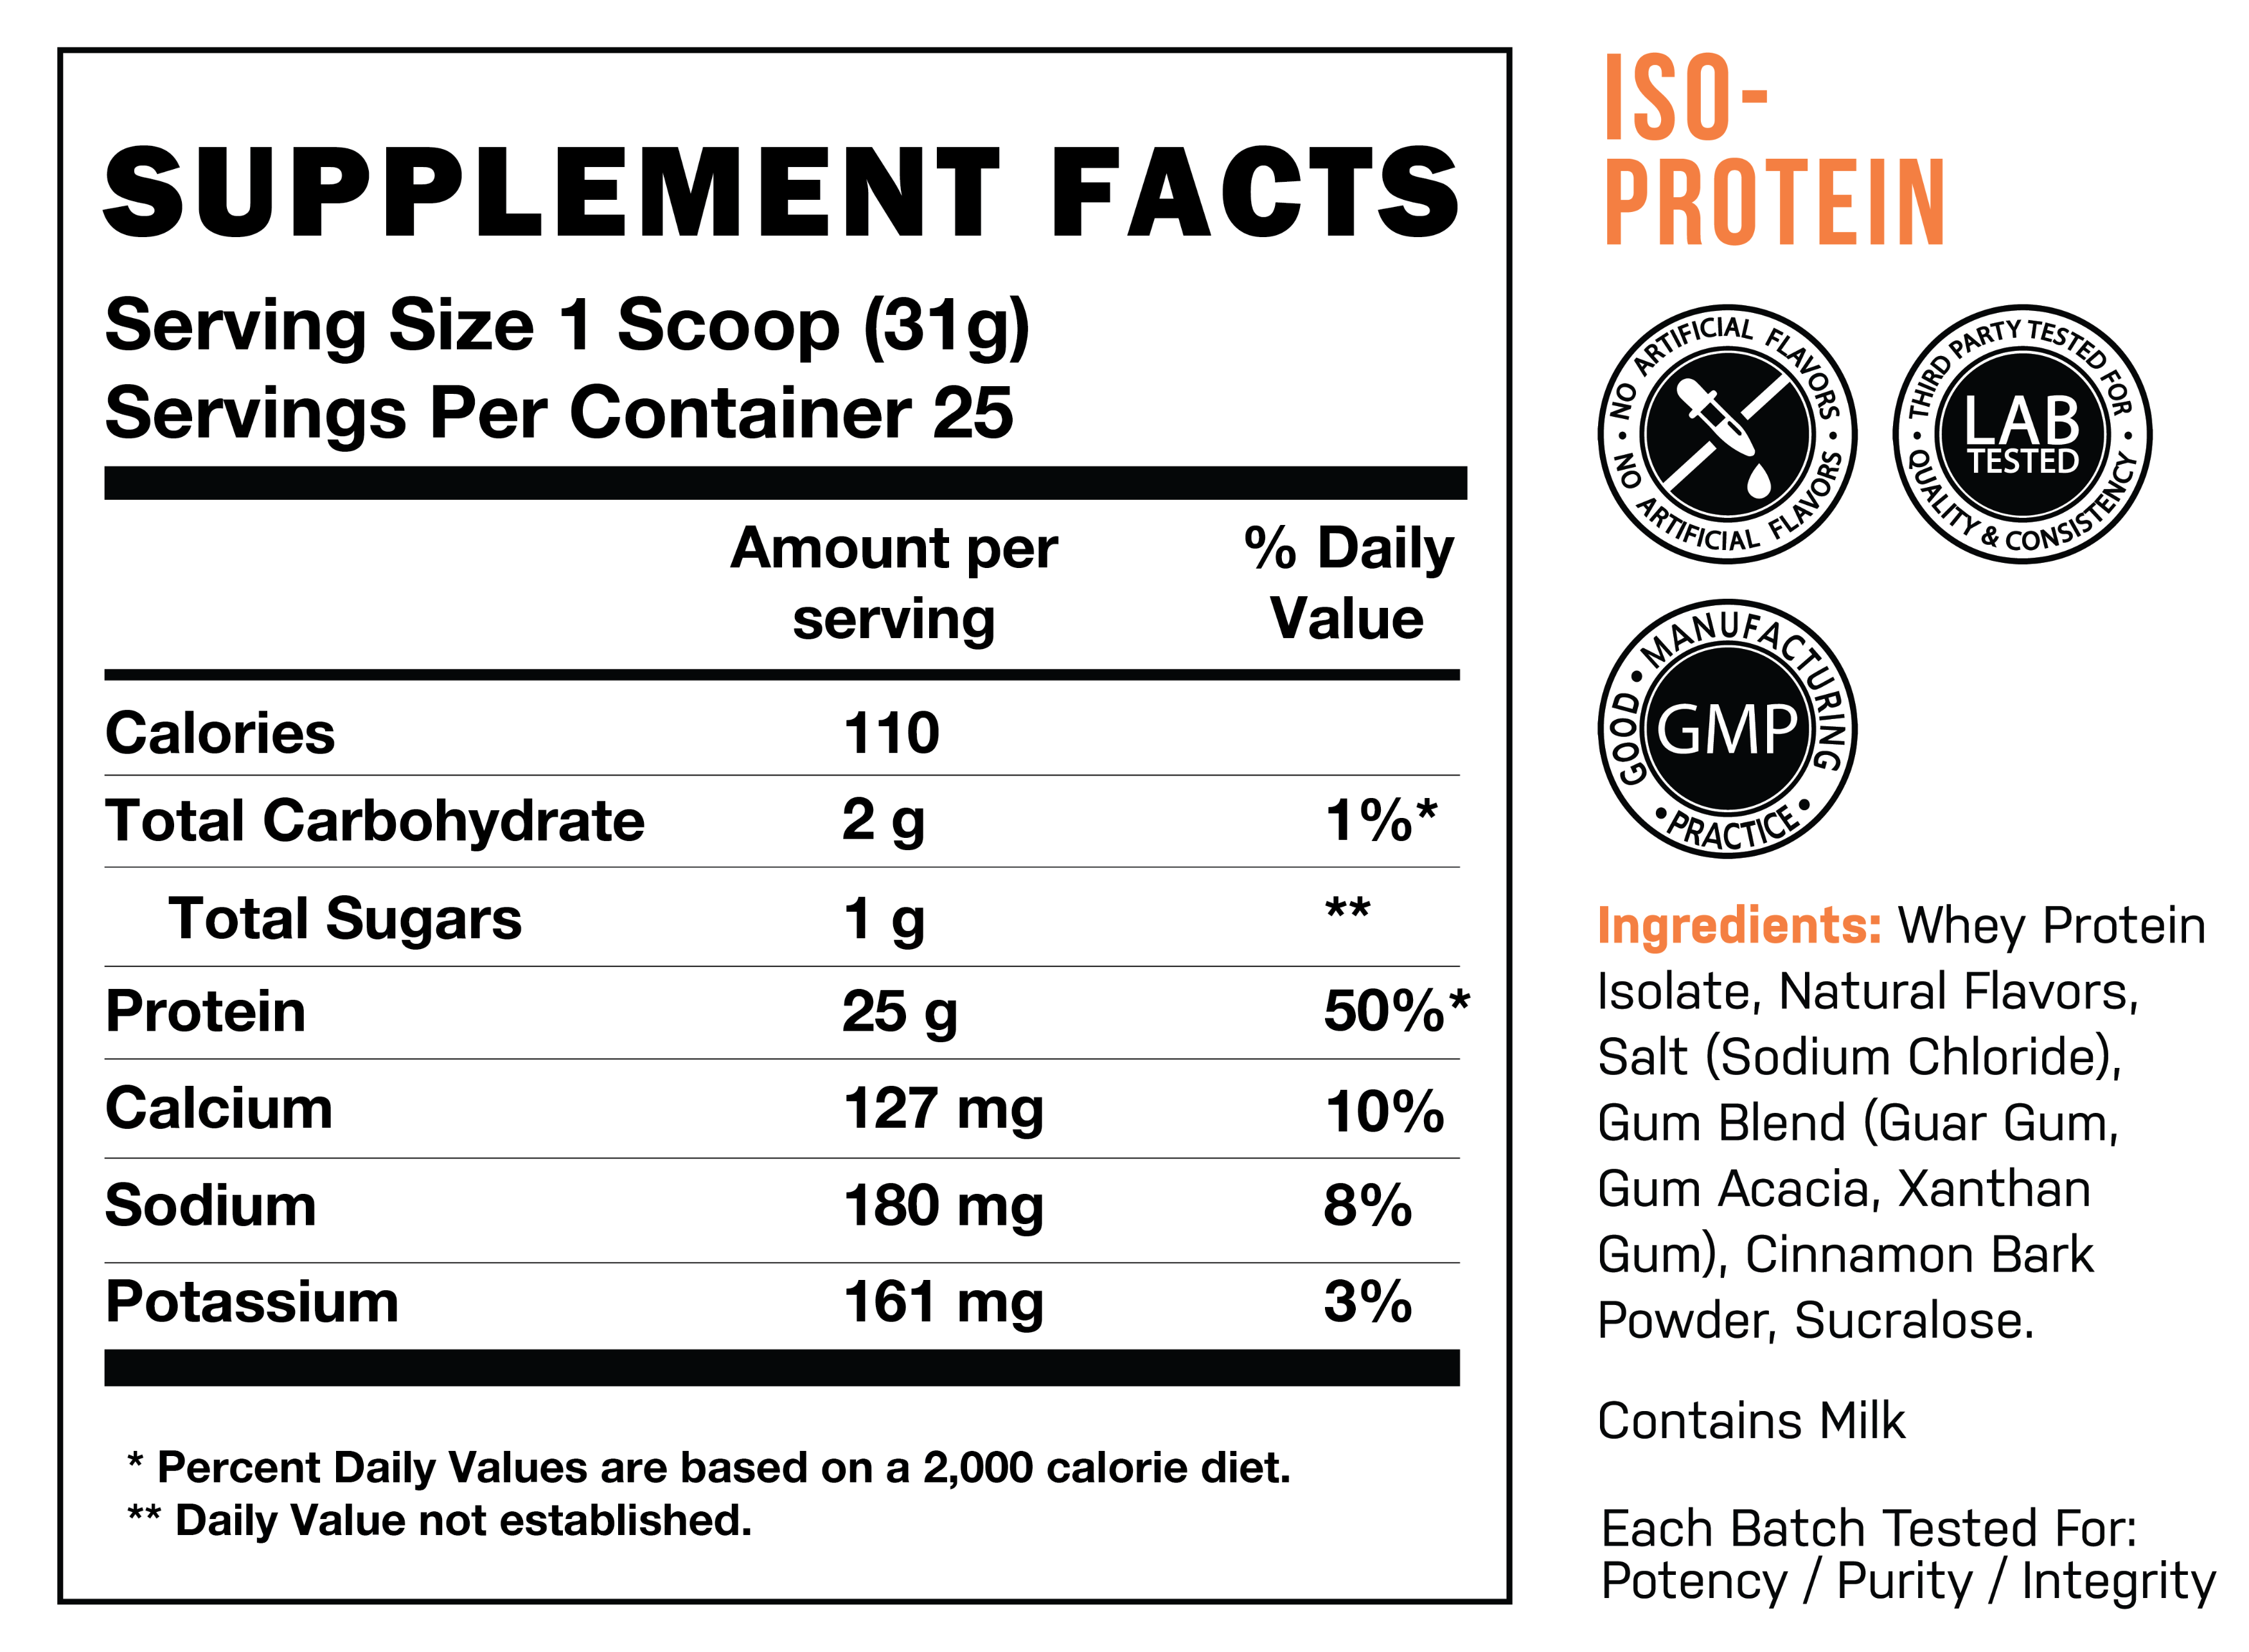 Supplement facts for a 31g scoop of ISO-Protein. Contains 110 calories, 2g carbs, 19g sugar, 25g protein, and several minerals. Ingredients listed.